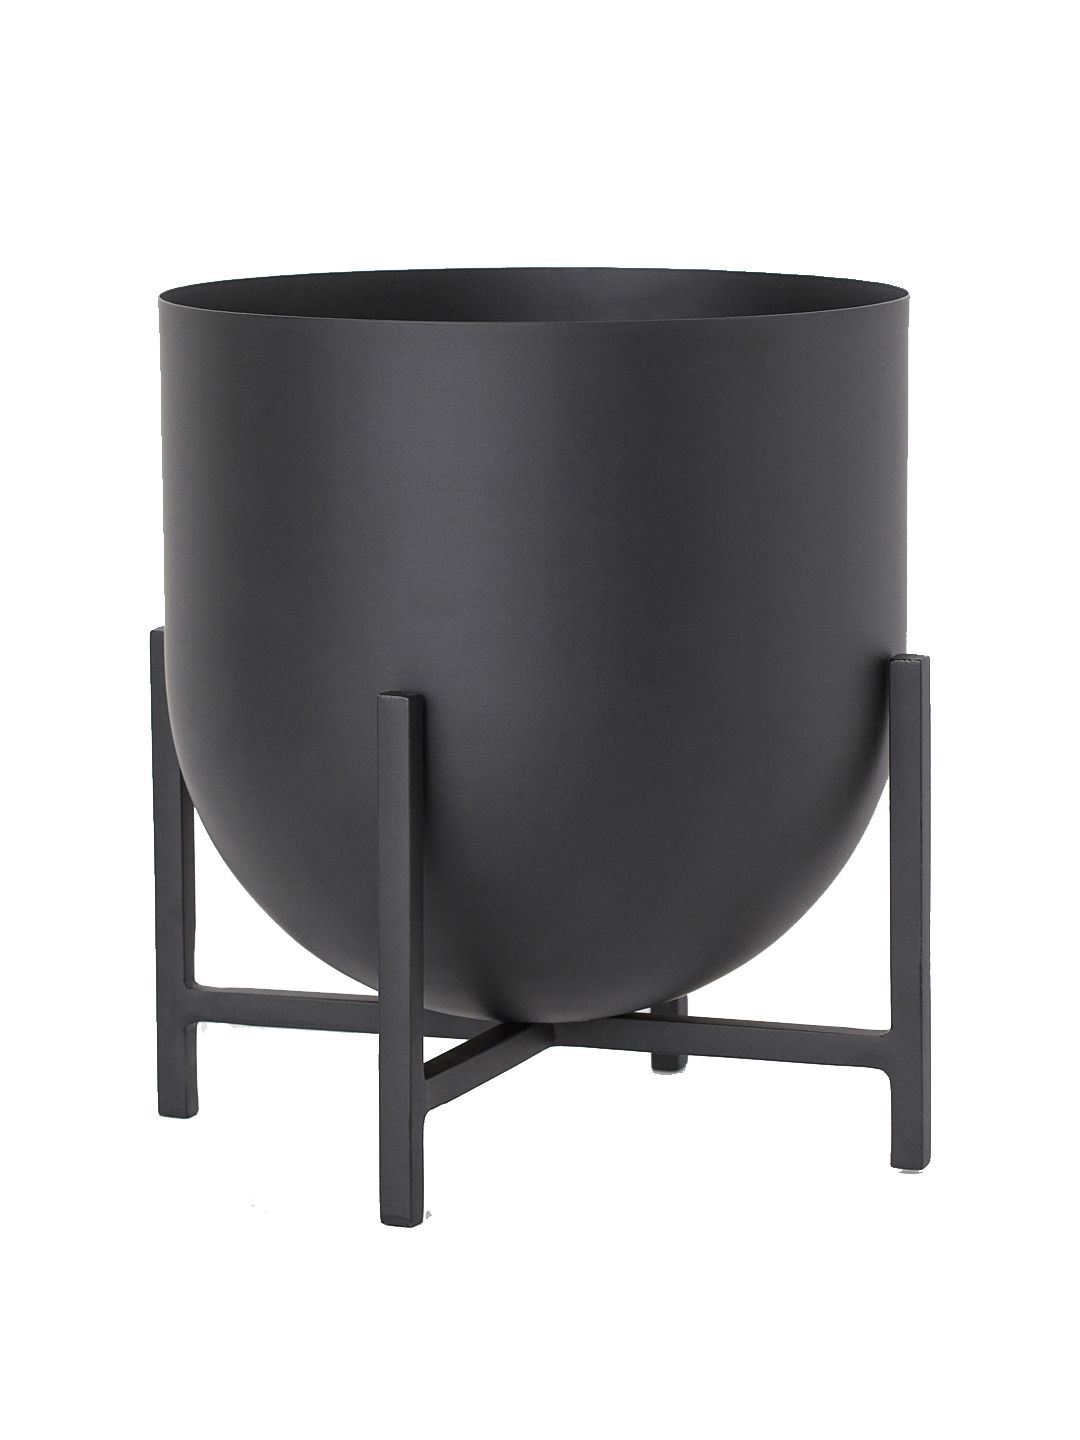 H&M Black Large Plant Pot on a Pedestal Price in India